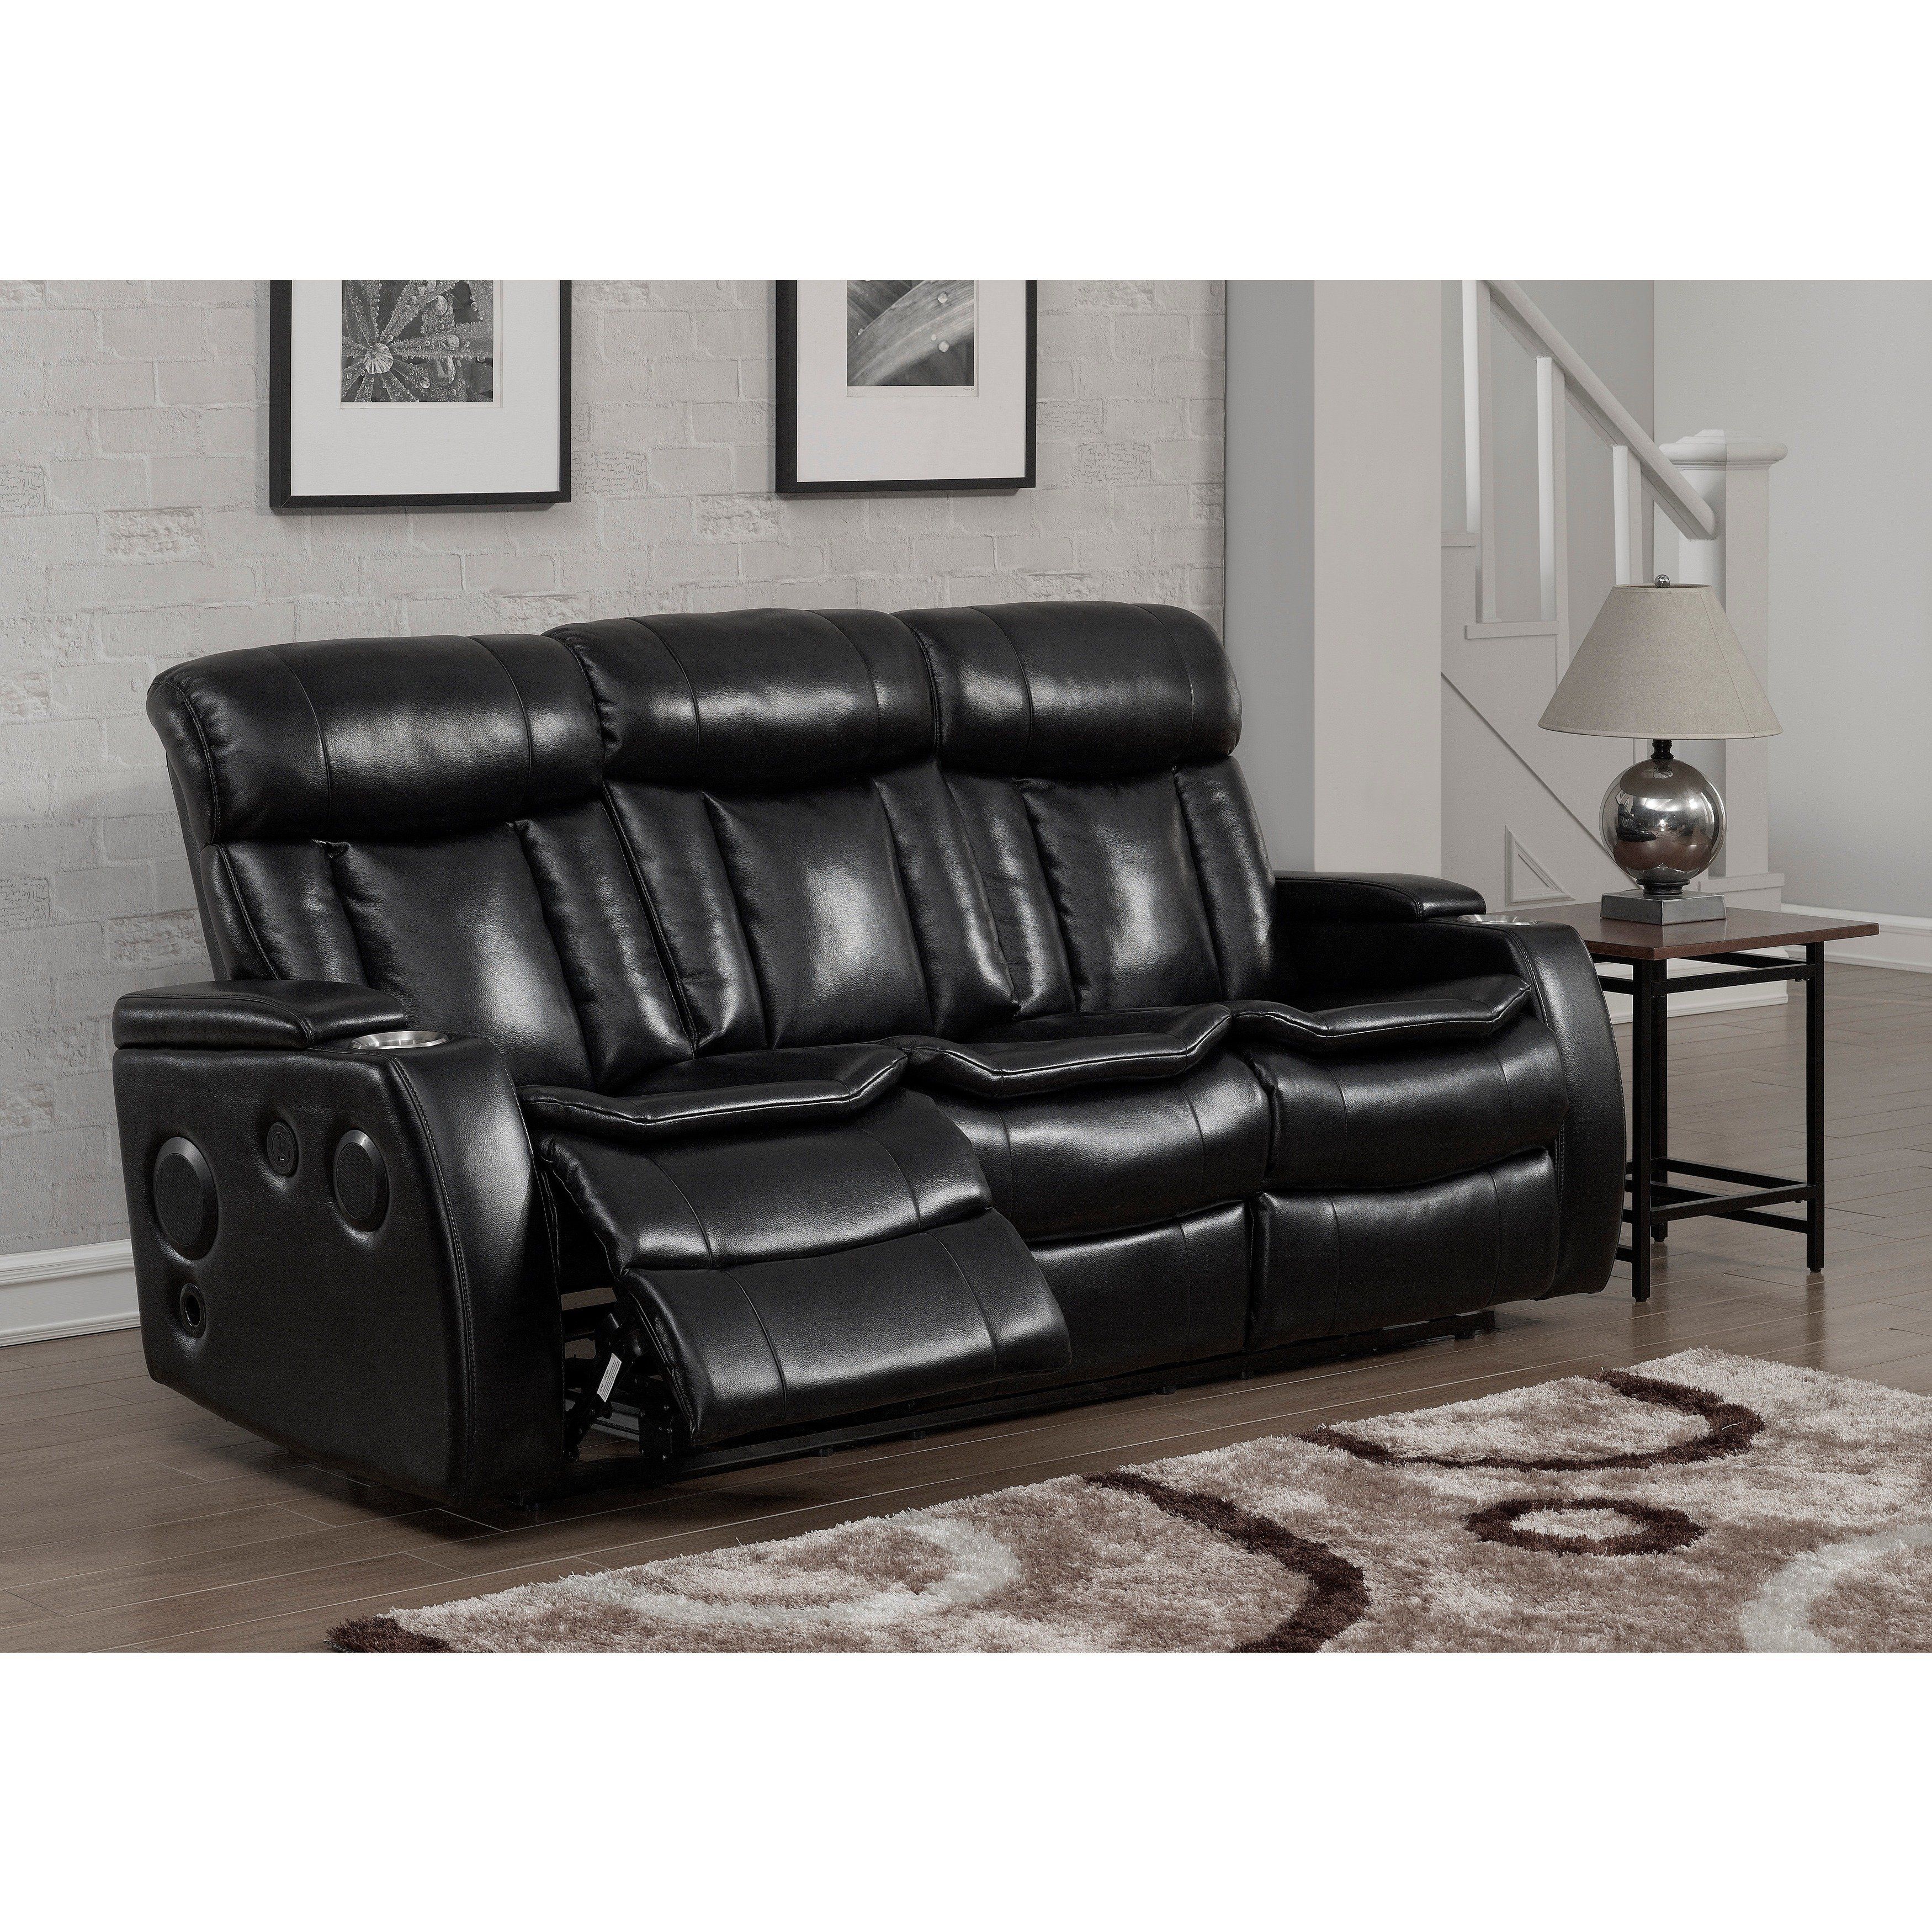 Delano Power Reclining Sofa With Usb | Baci Living Room Within Clyde Grey Leather 3 Piece Power Reclining Sectionals With Pwr Hdrst &amp; Usb (View 14 of 30)